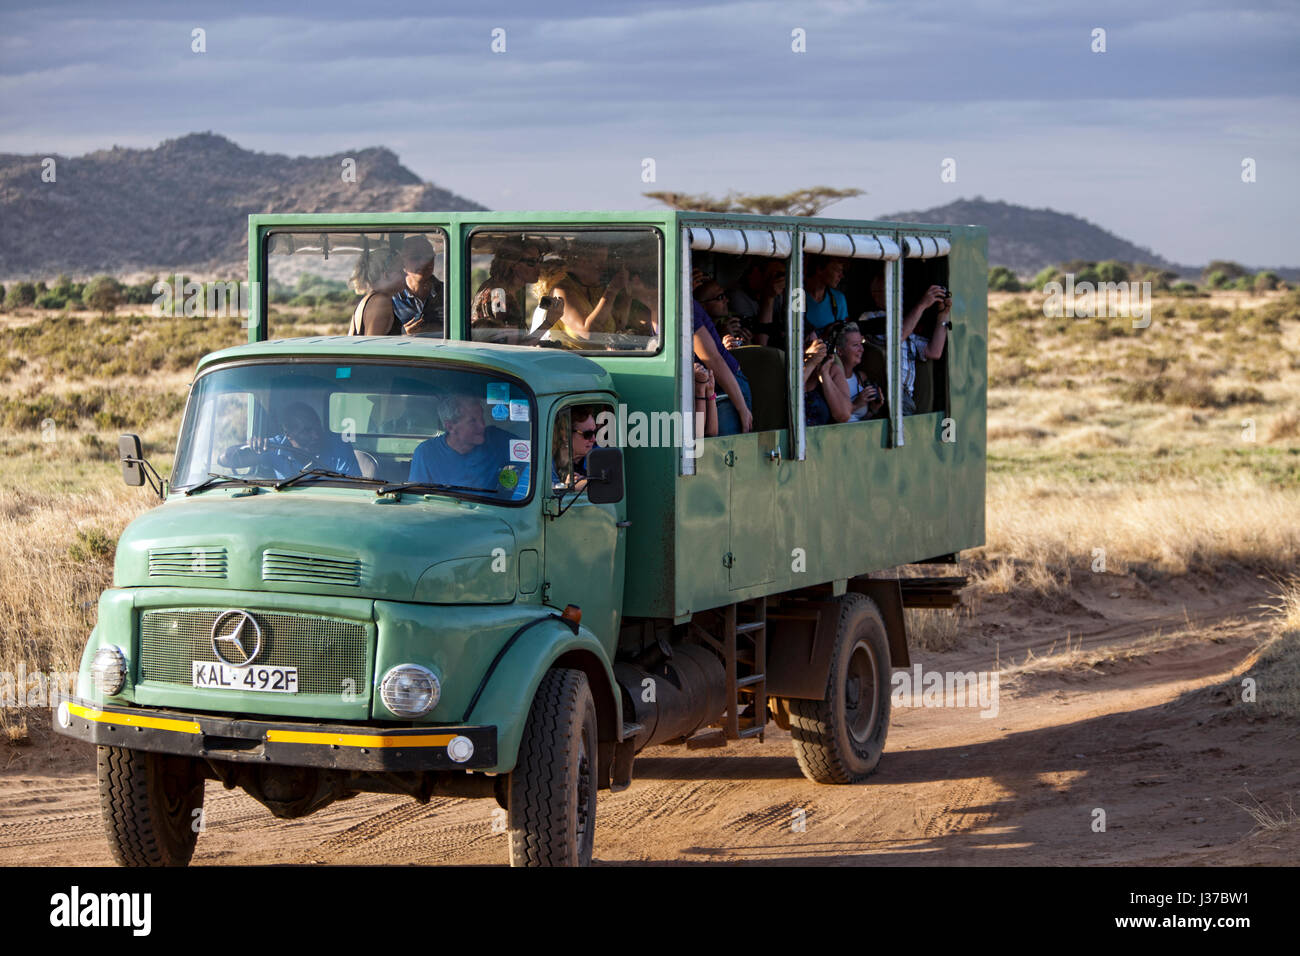 Safari rig filled with tourist and their guides in the Samburu National Reserve, Kenya, Africa. Stock Photo